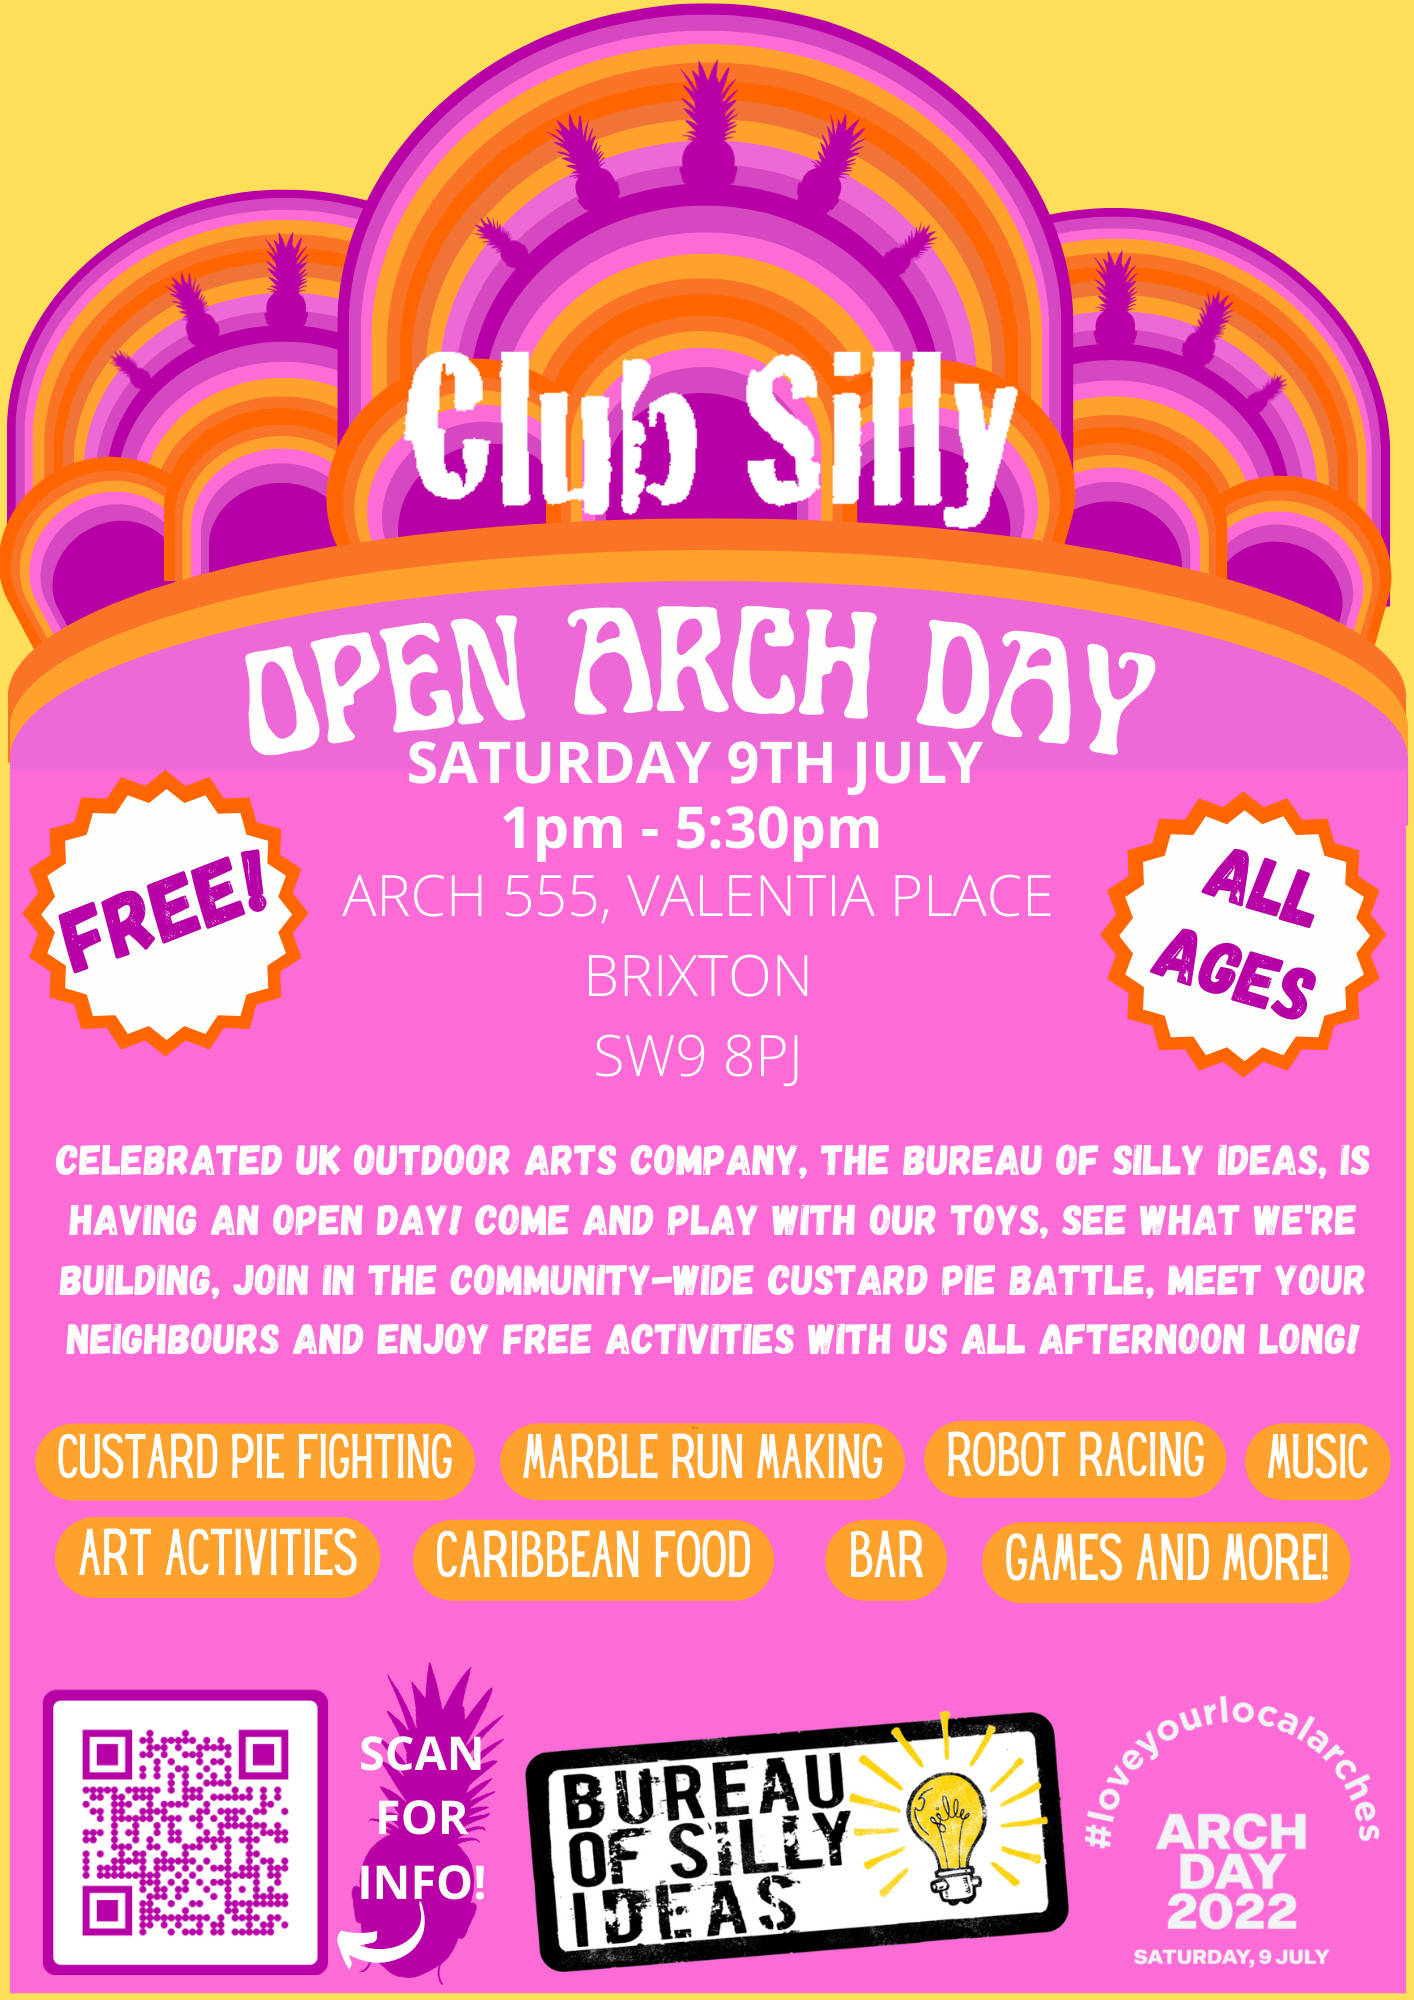 open arch day poster for Club Silly, Brixton